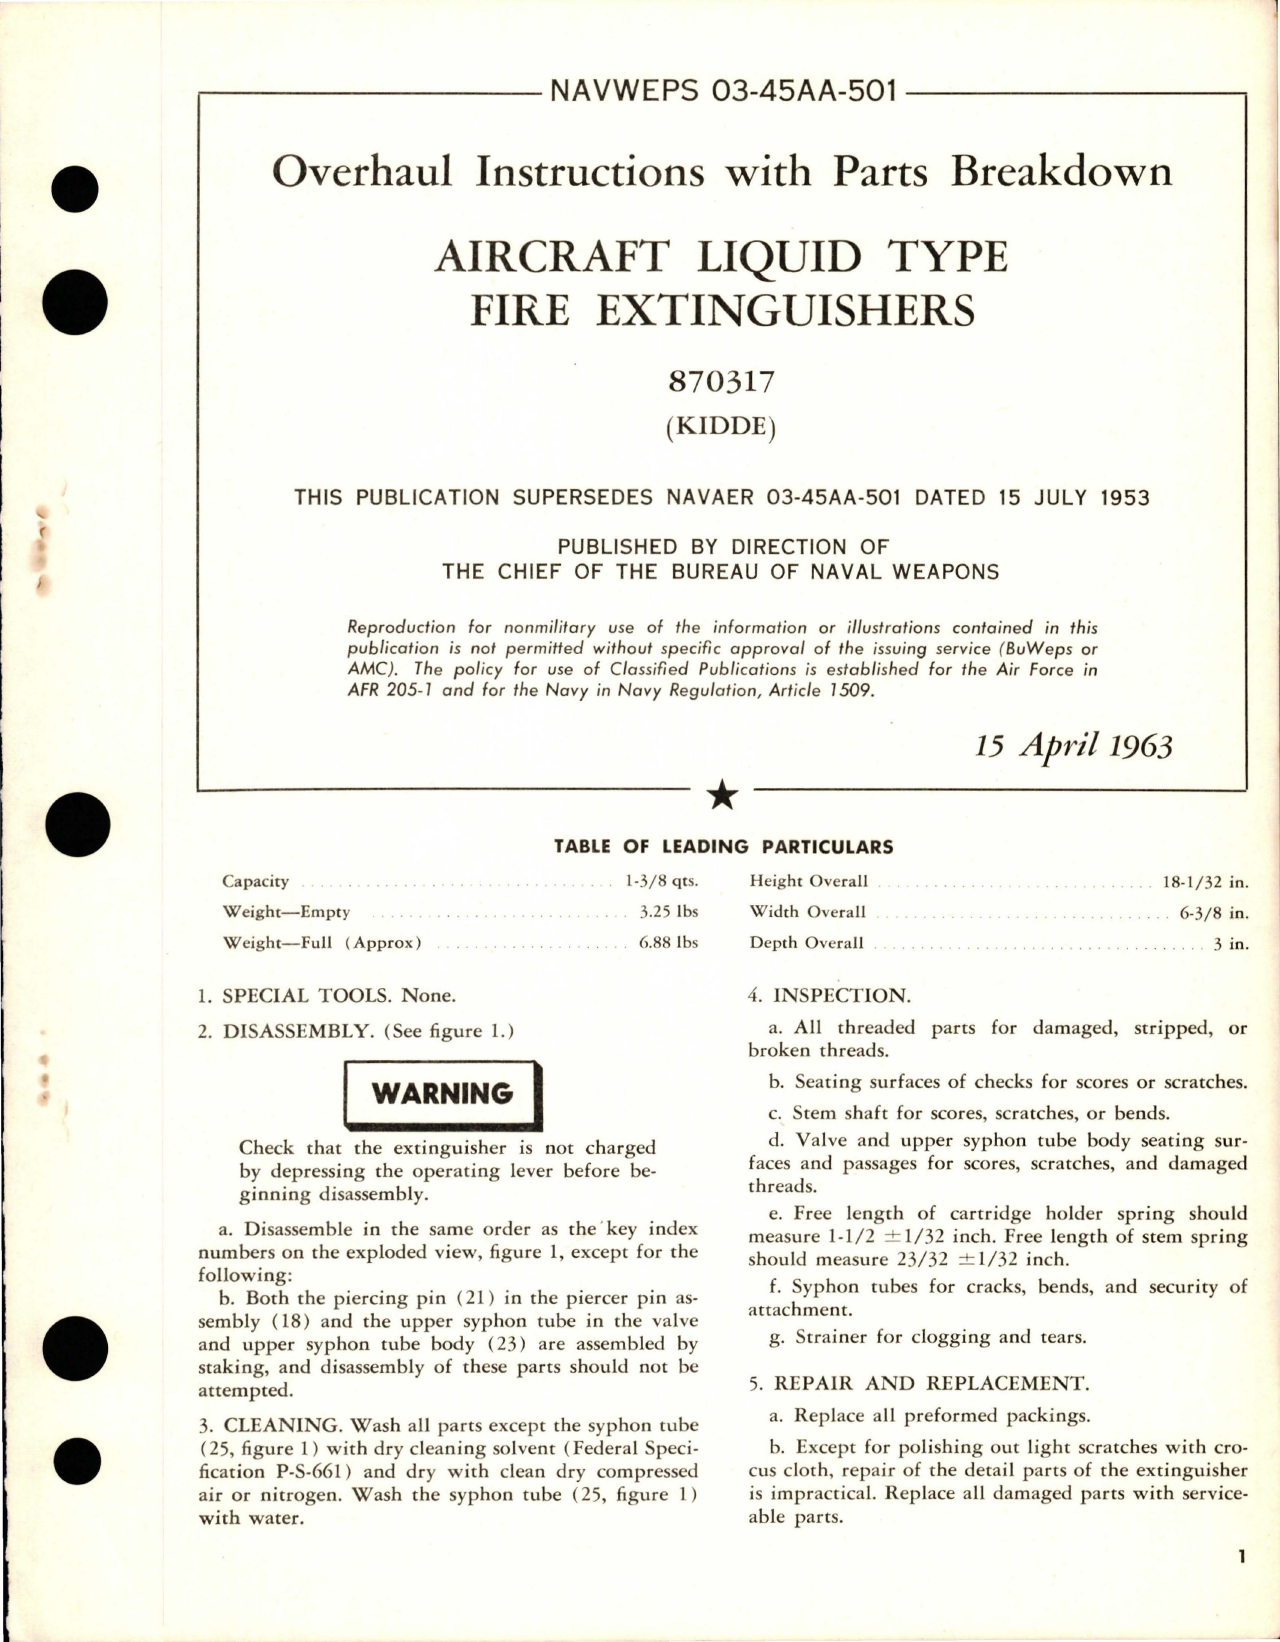 Sample page 1 from AirCorps Library document: Overhaul Instructions with Parts Breakdown for Aircraft Liquid Type Fire Extinguishers - 870317